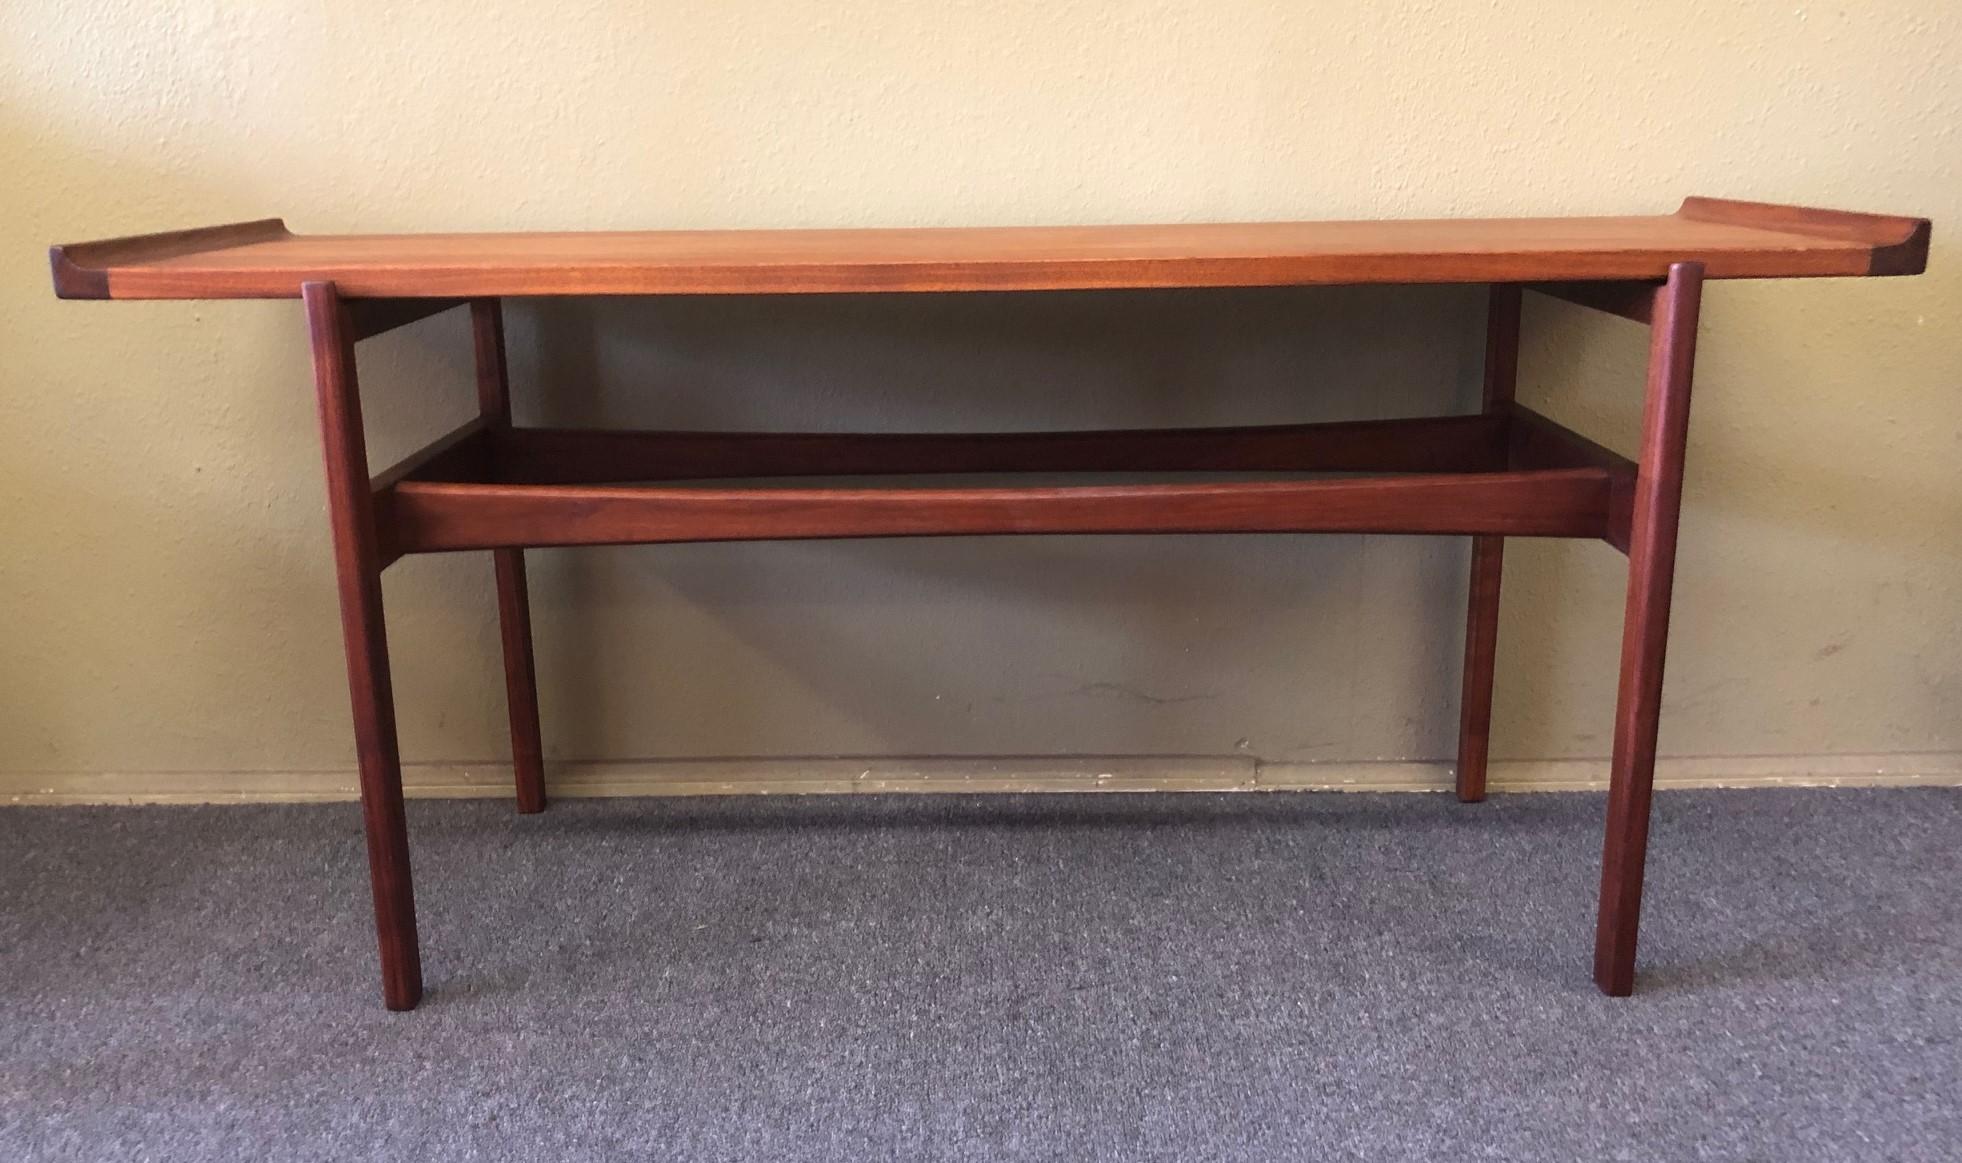 20th Century Mid-Century Modern Flared Teak Console Table by Jens Risom